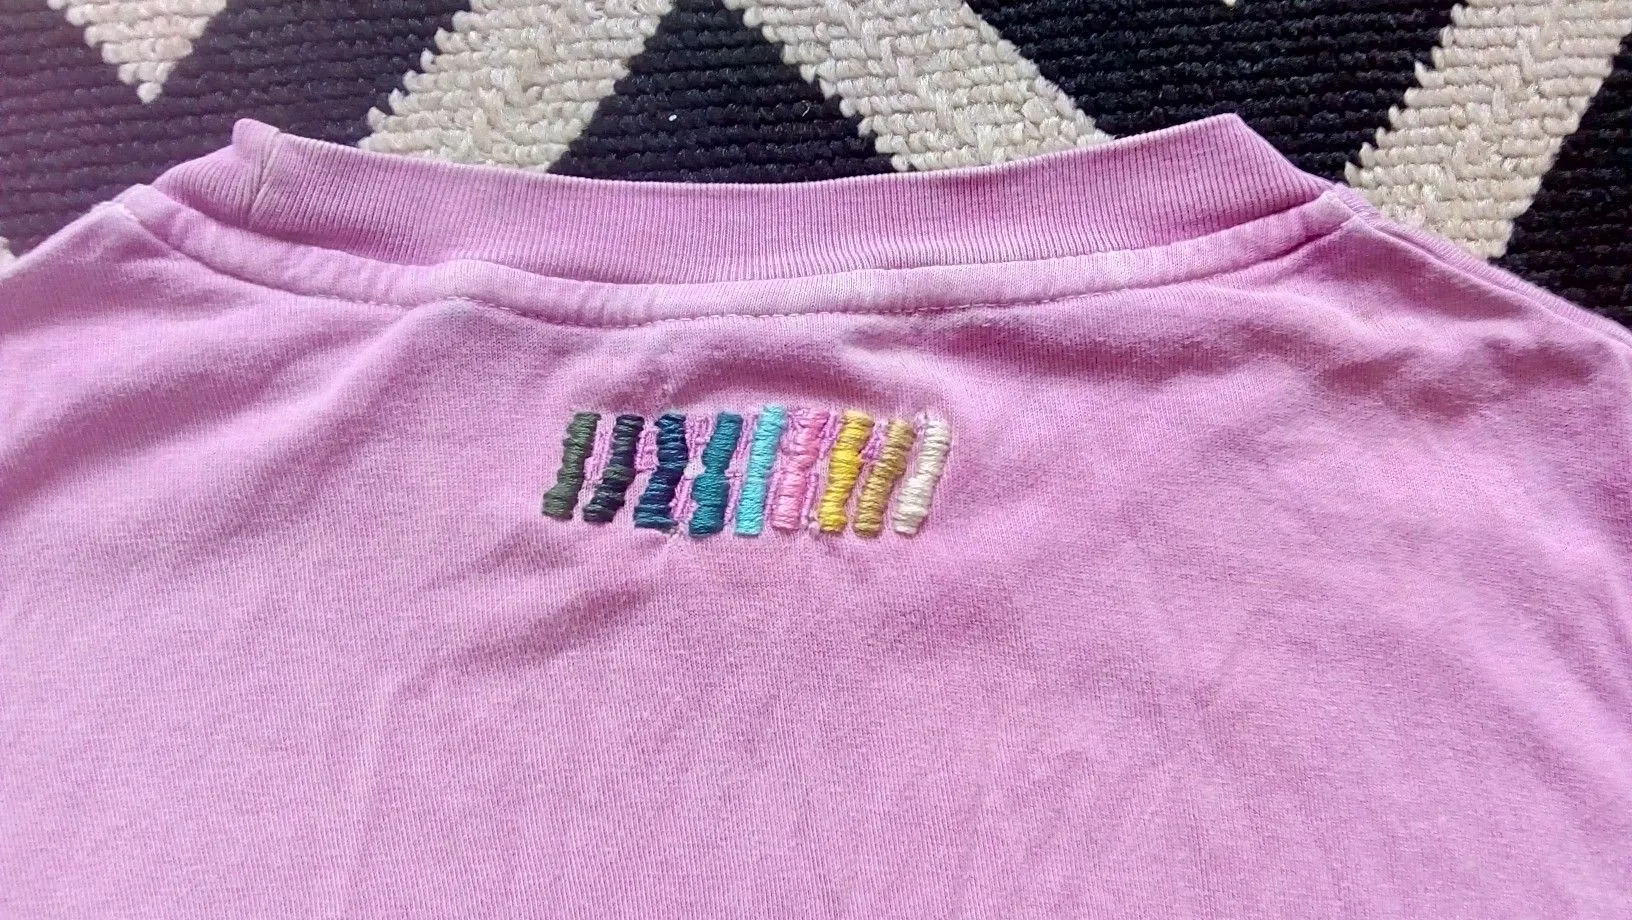 How to embroider over a hole